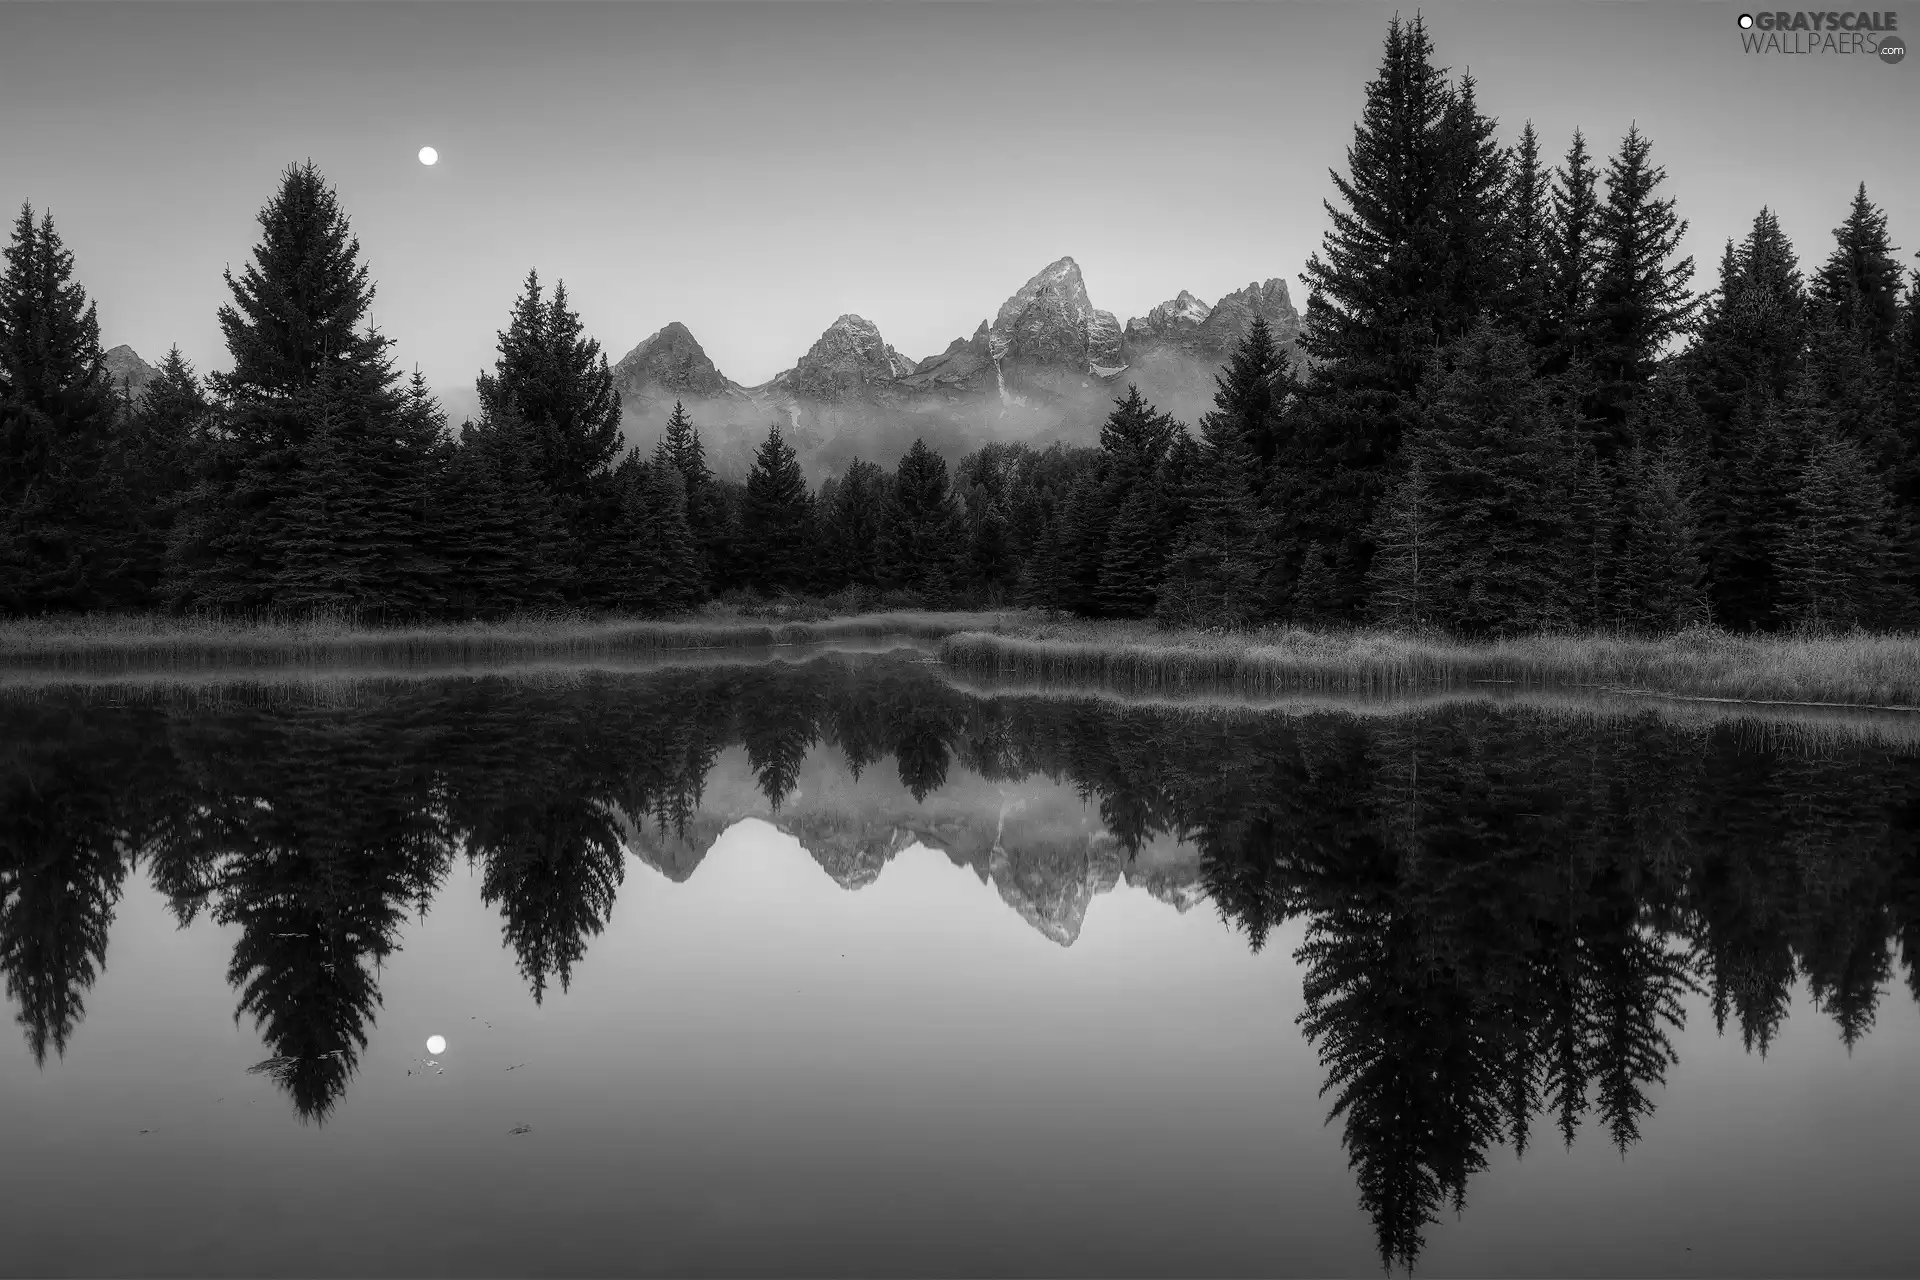 lake, Spruces, reflection, Mountains